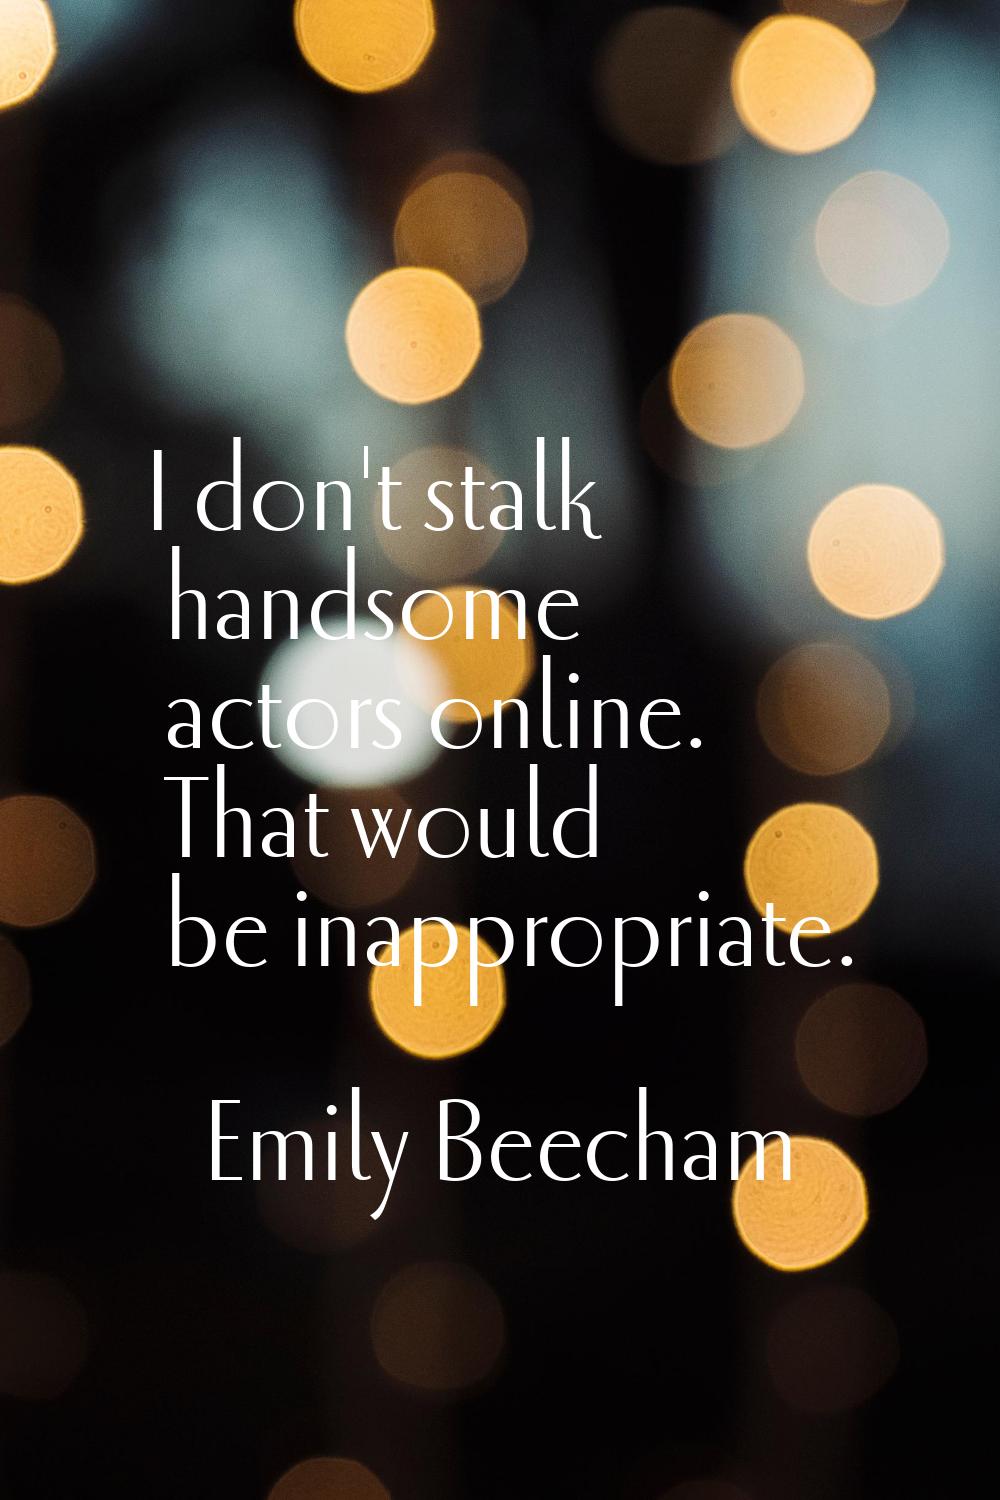 I don't stalk handsome actors online. That would be inappropriate.